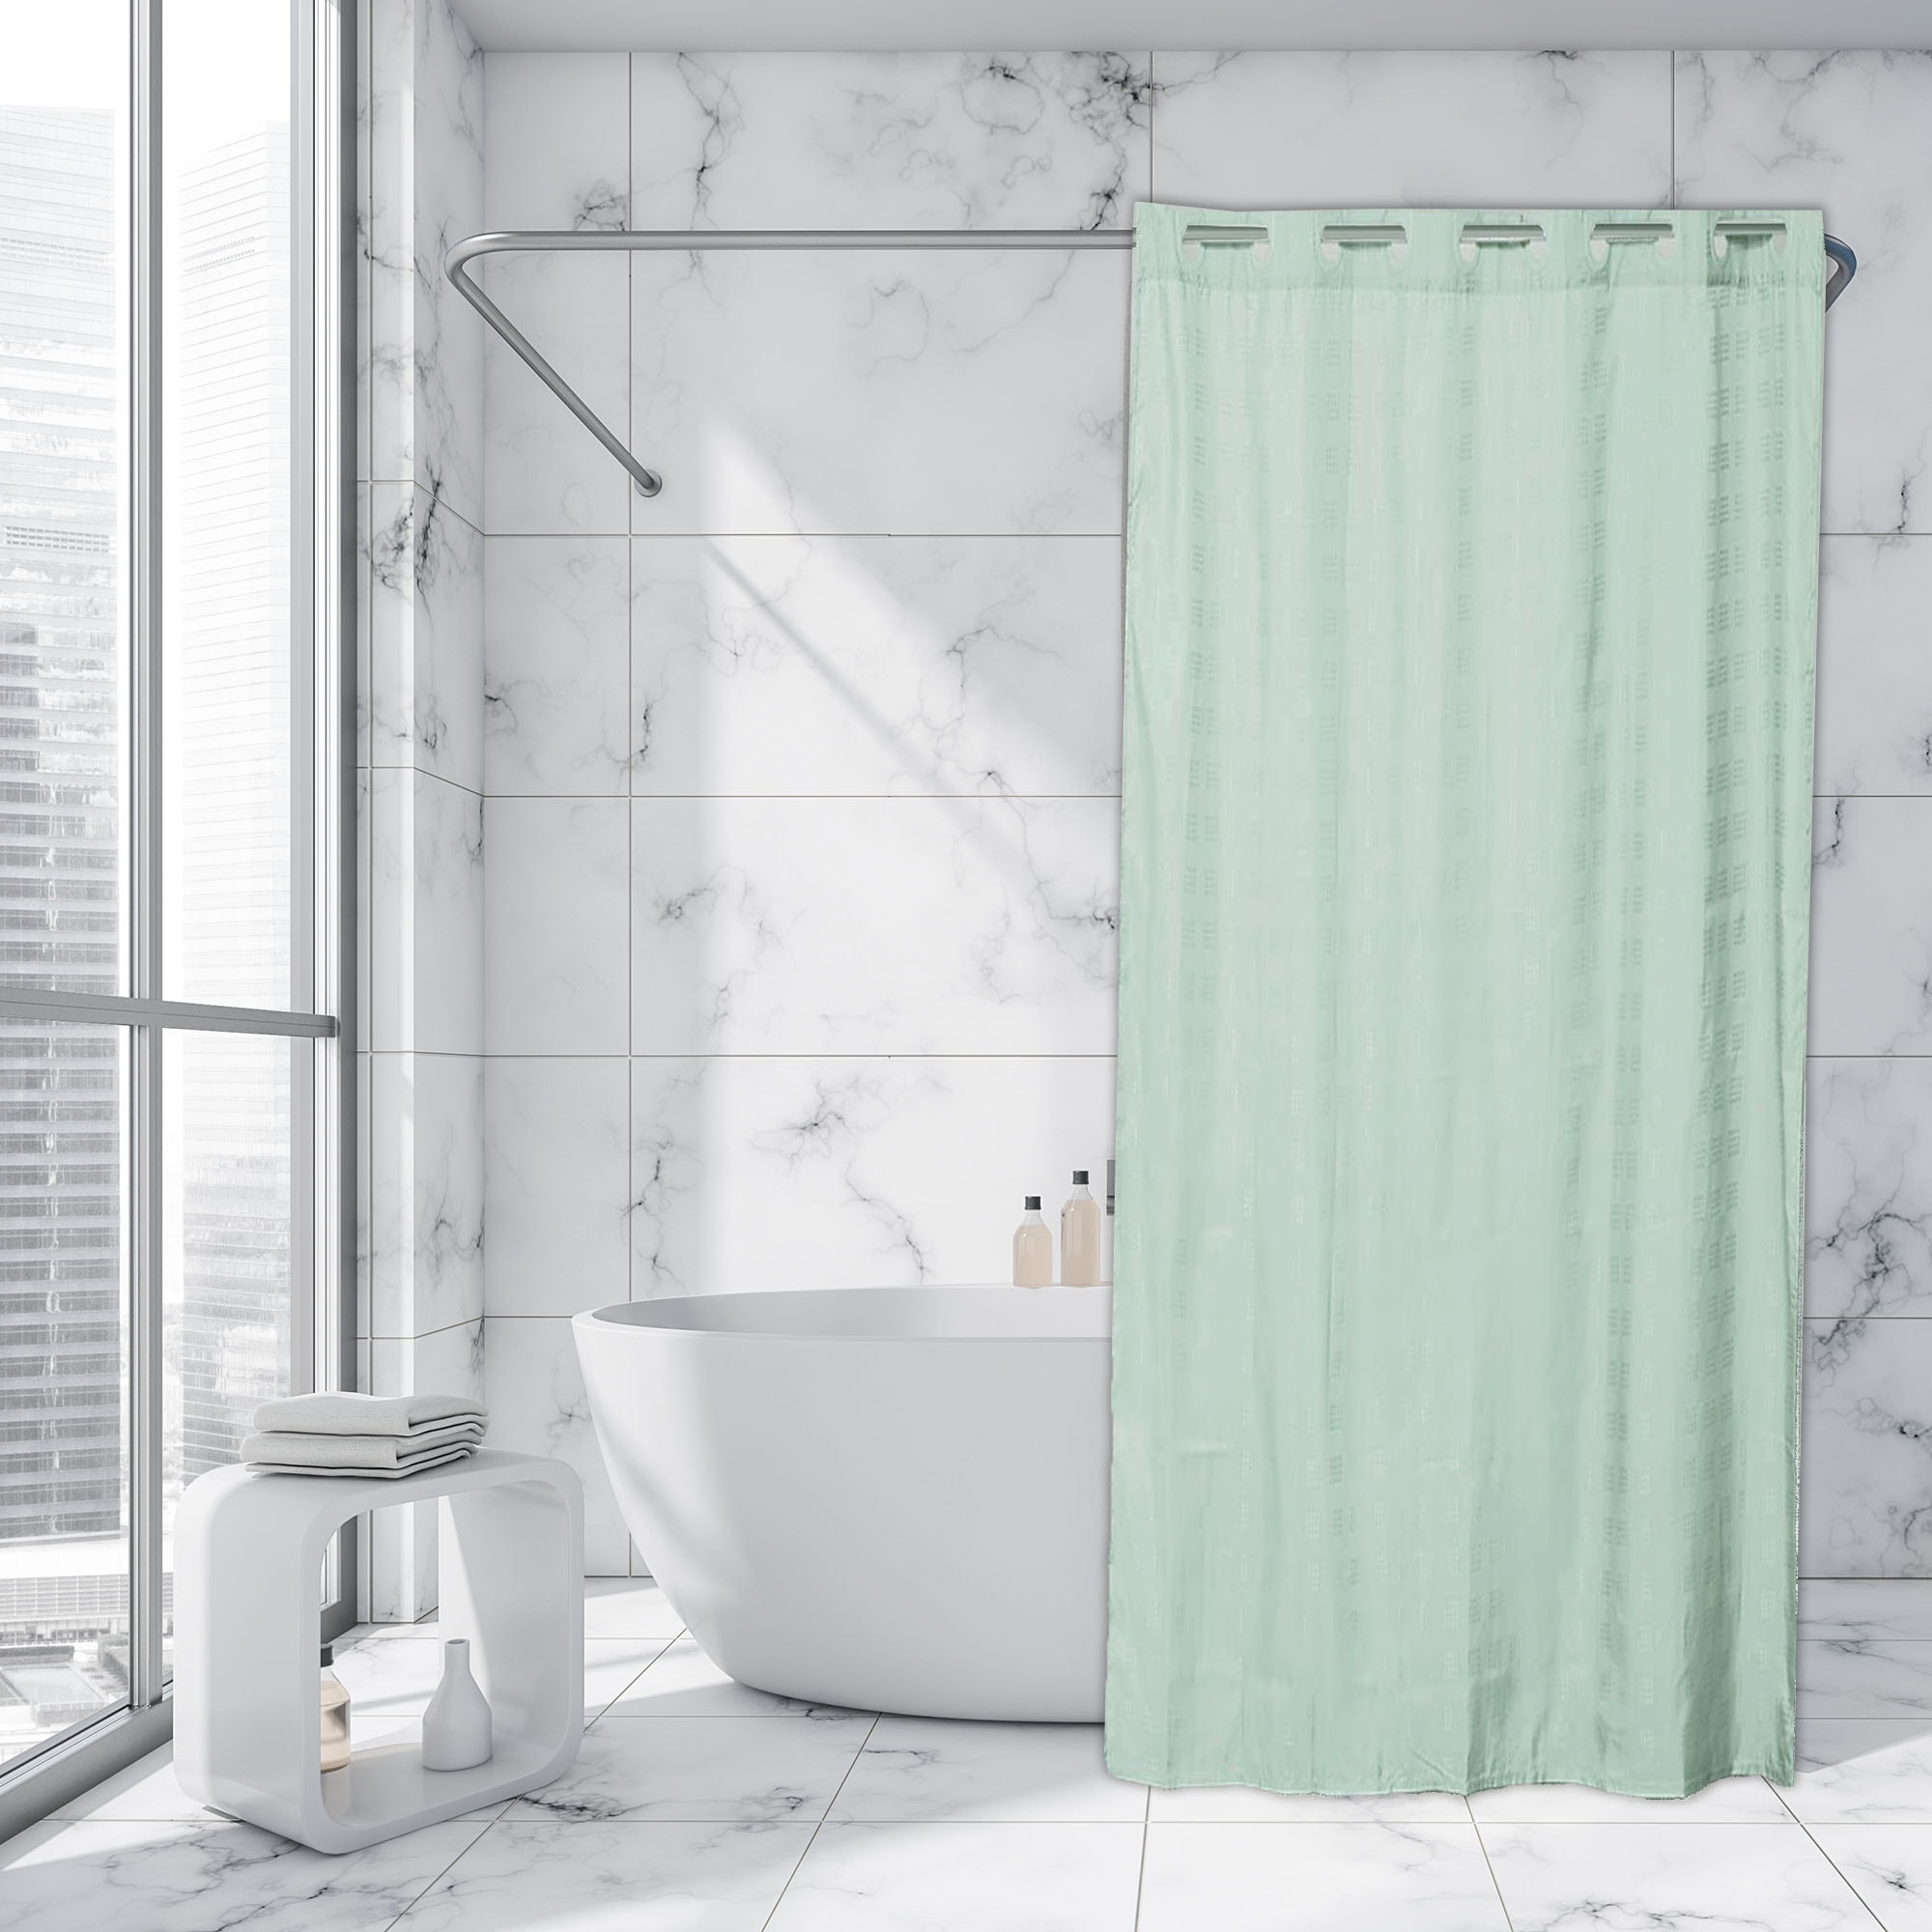 https://ak1.ostkcdn.com/images/products/is/images/direct/19787e31b1b5d7cd88e70478190dde85e1dff4eb/Extra-Long-Shower-Curtain-Polyester-Hook-Less-Cubic-79%22L-x-71%22W.jpg